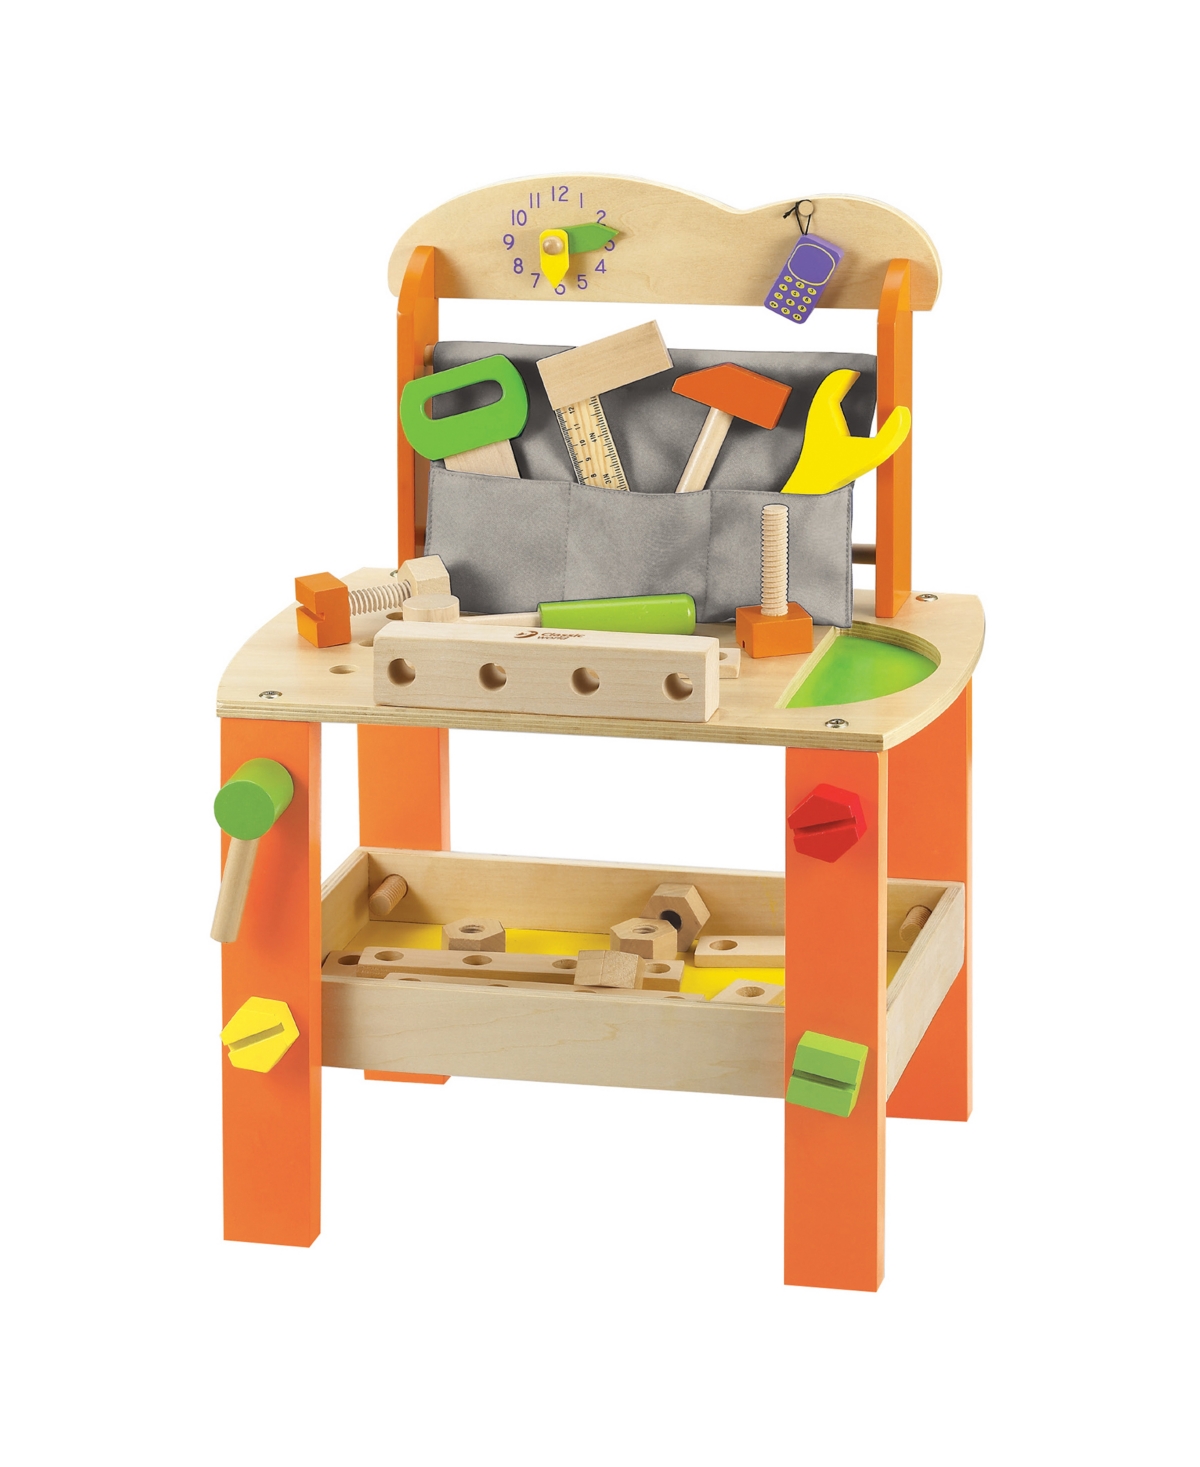 Classic Toy Kids' Wood Work Bench With Tools In Orange